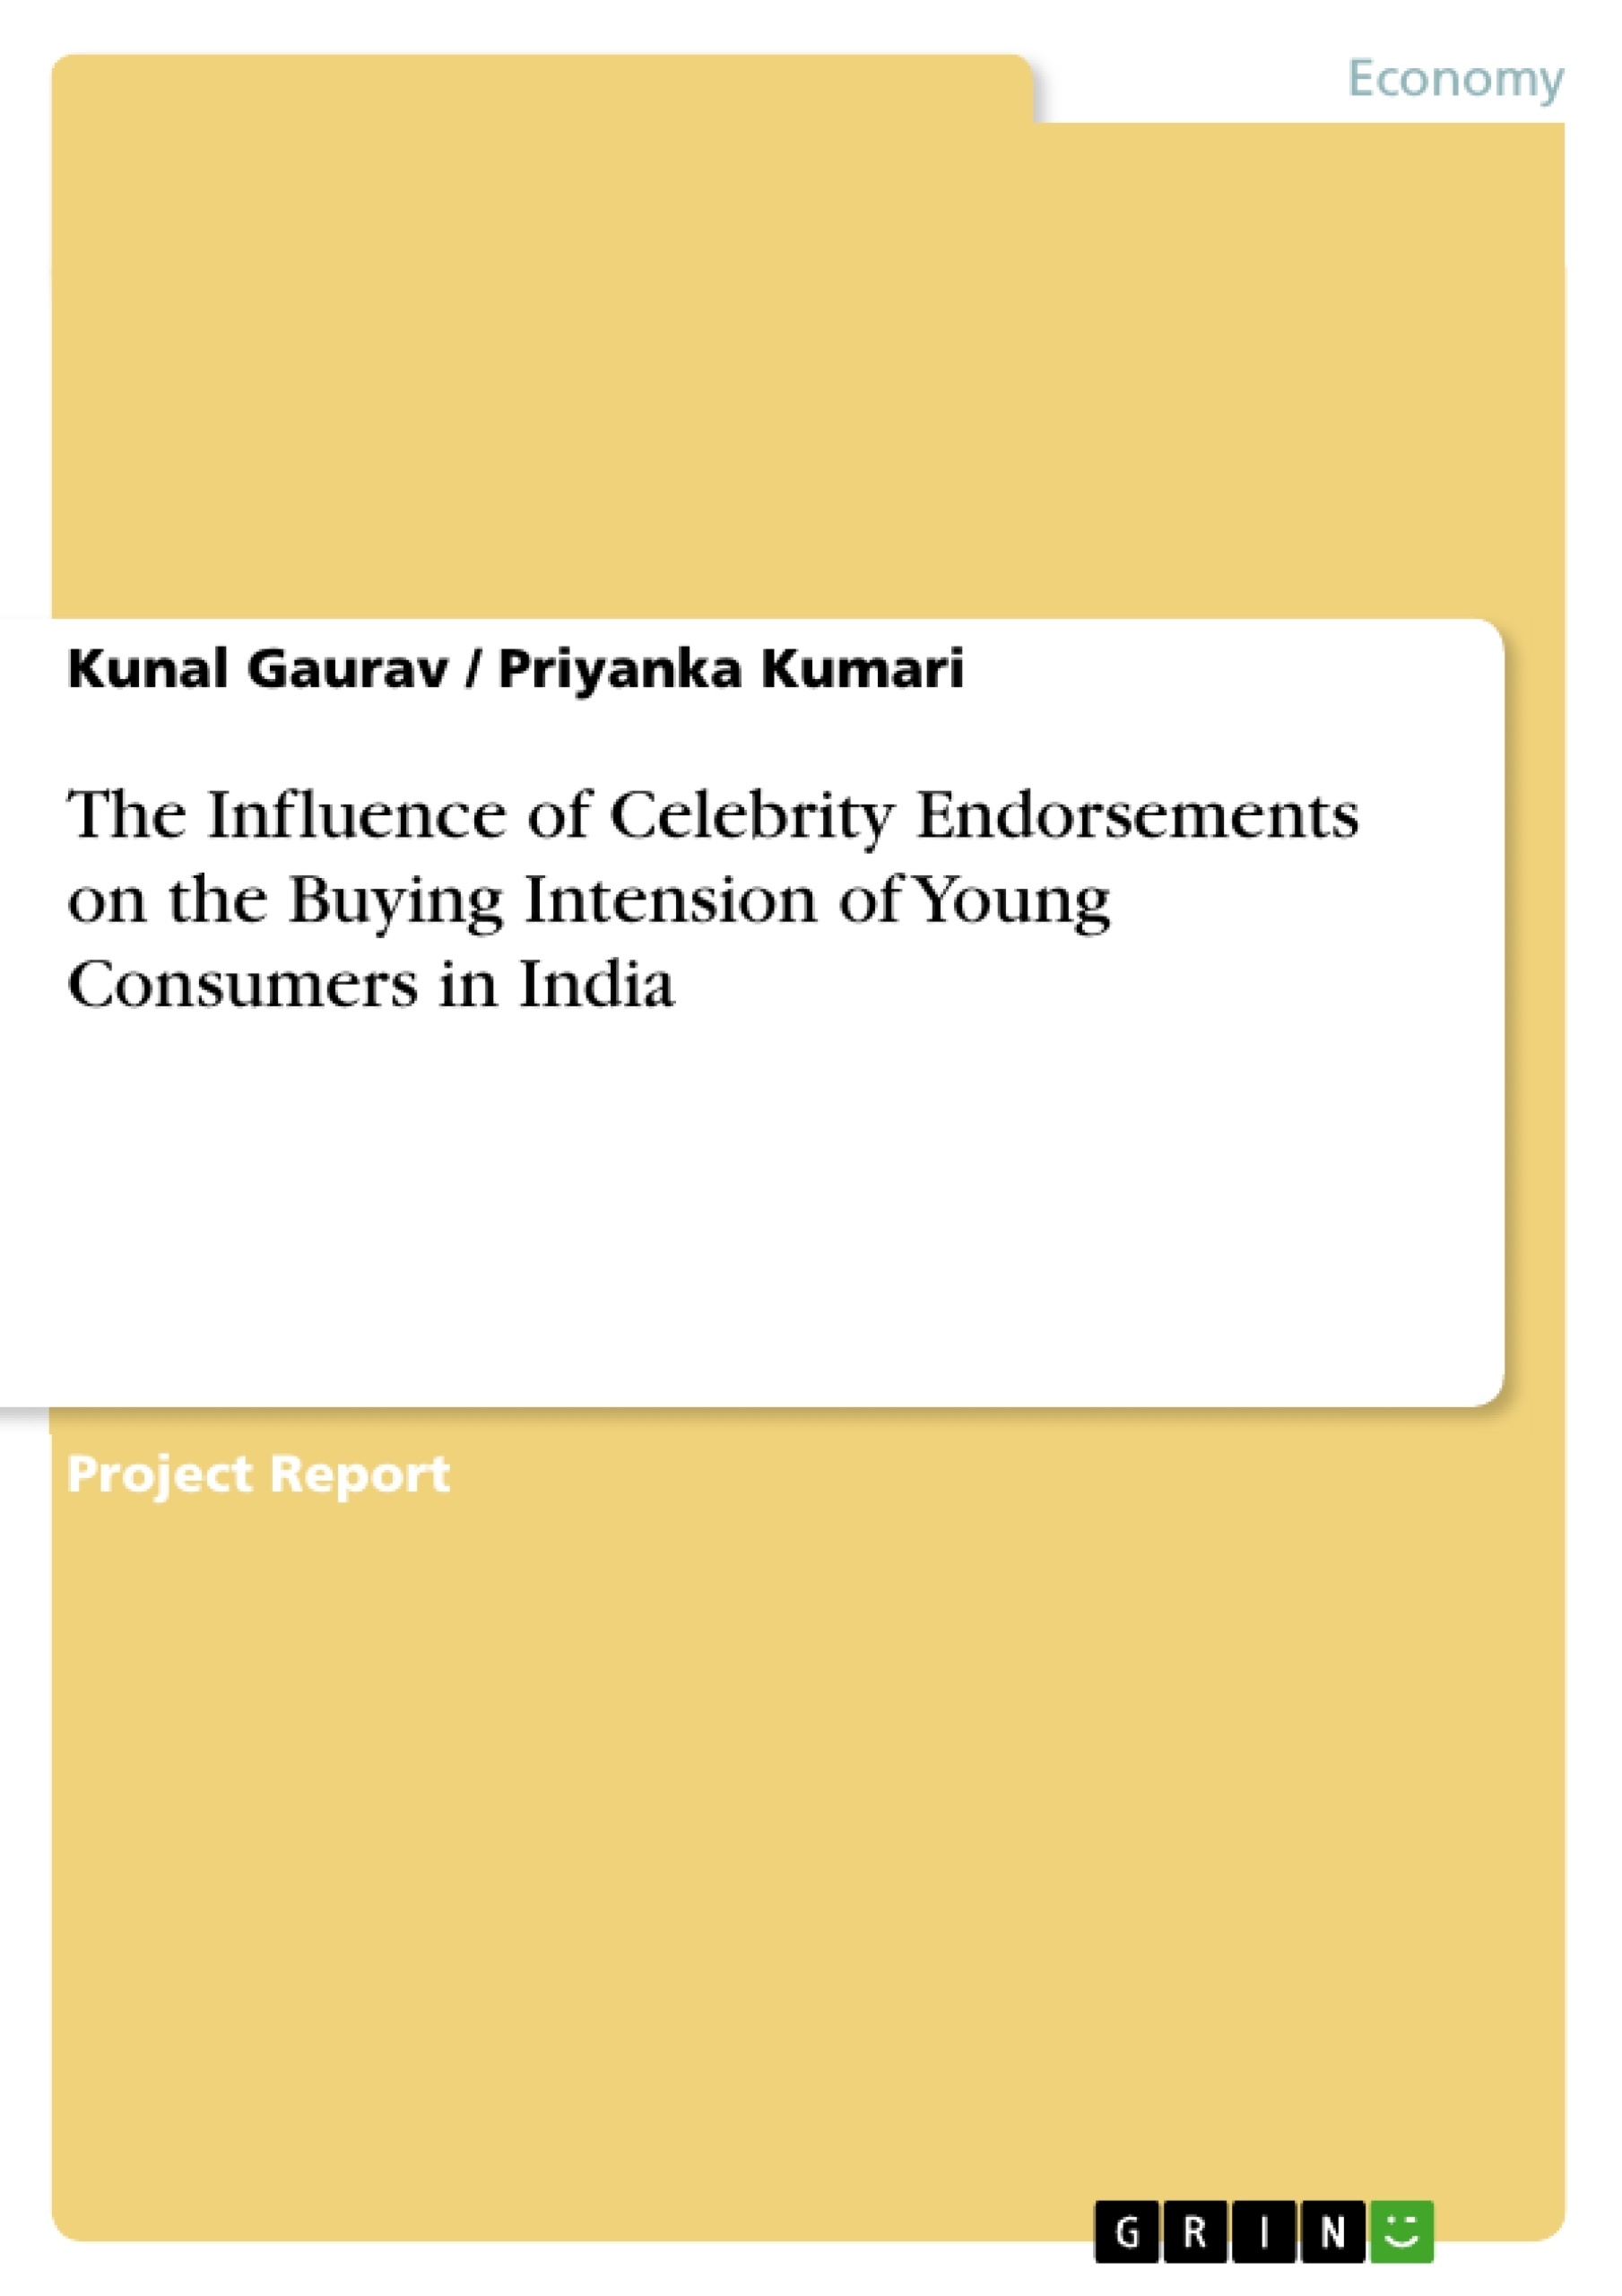 Title: The Influence of Celebrity Endorsements on the Buying Intension of Young Consumers in India